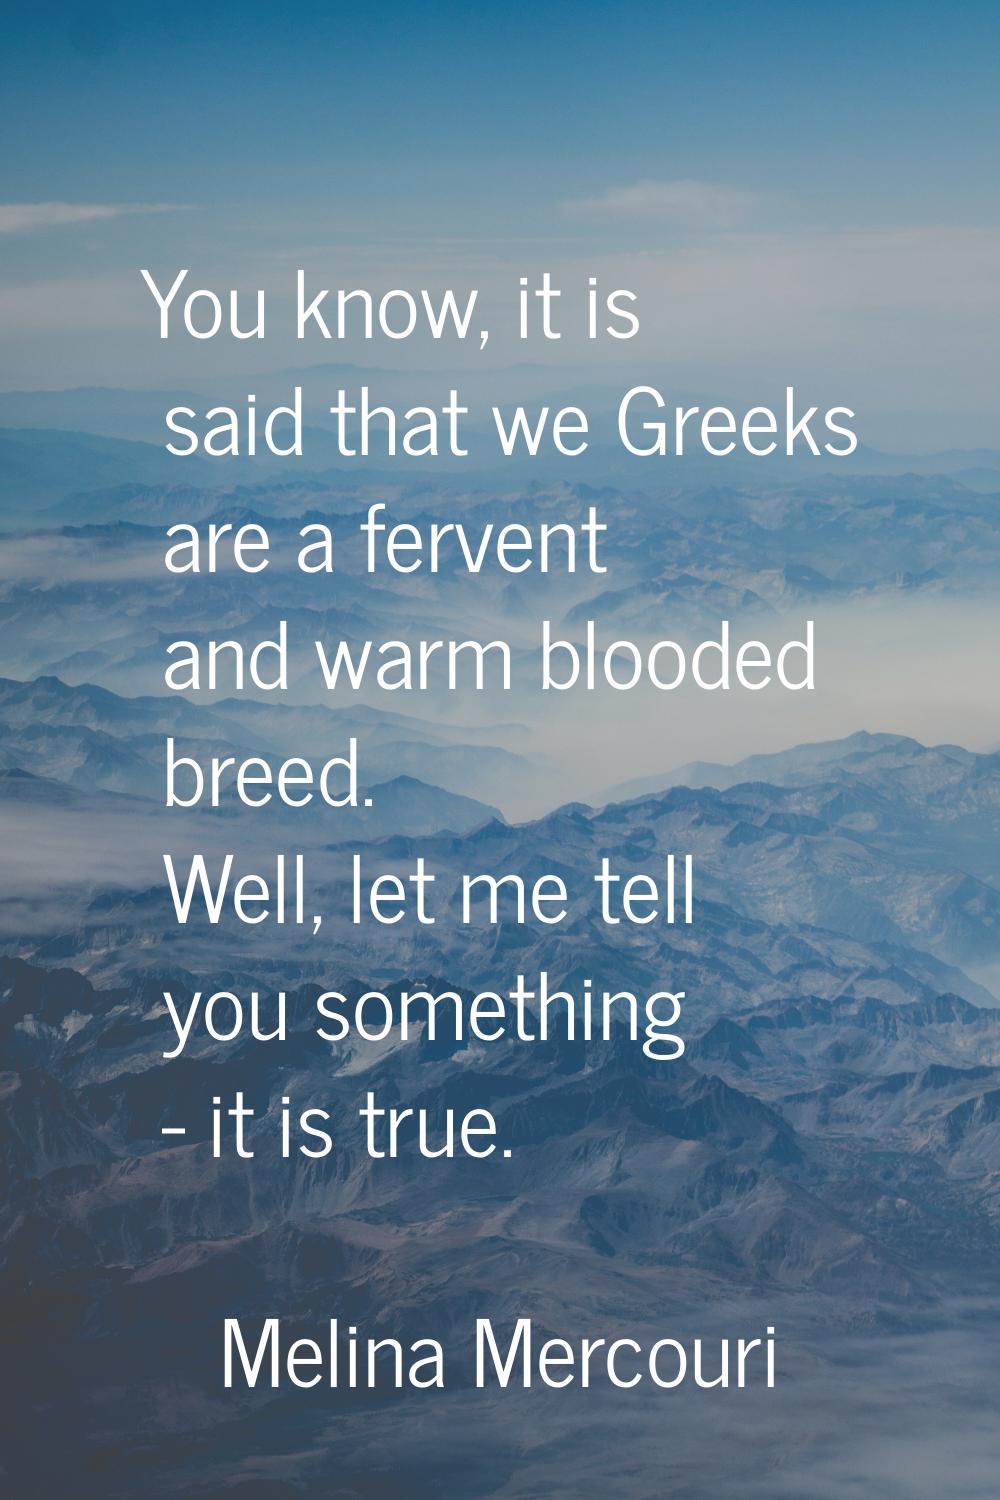 You know, it is said that we Greeks are a fervent and warm blooded breed. Well, let me tell you som